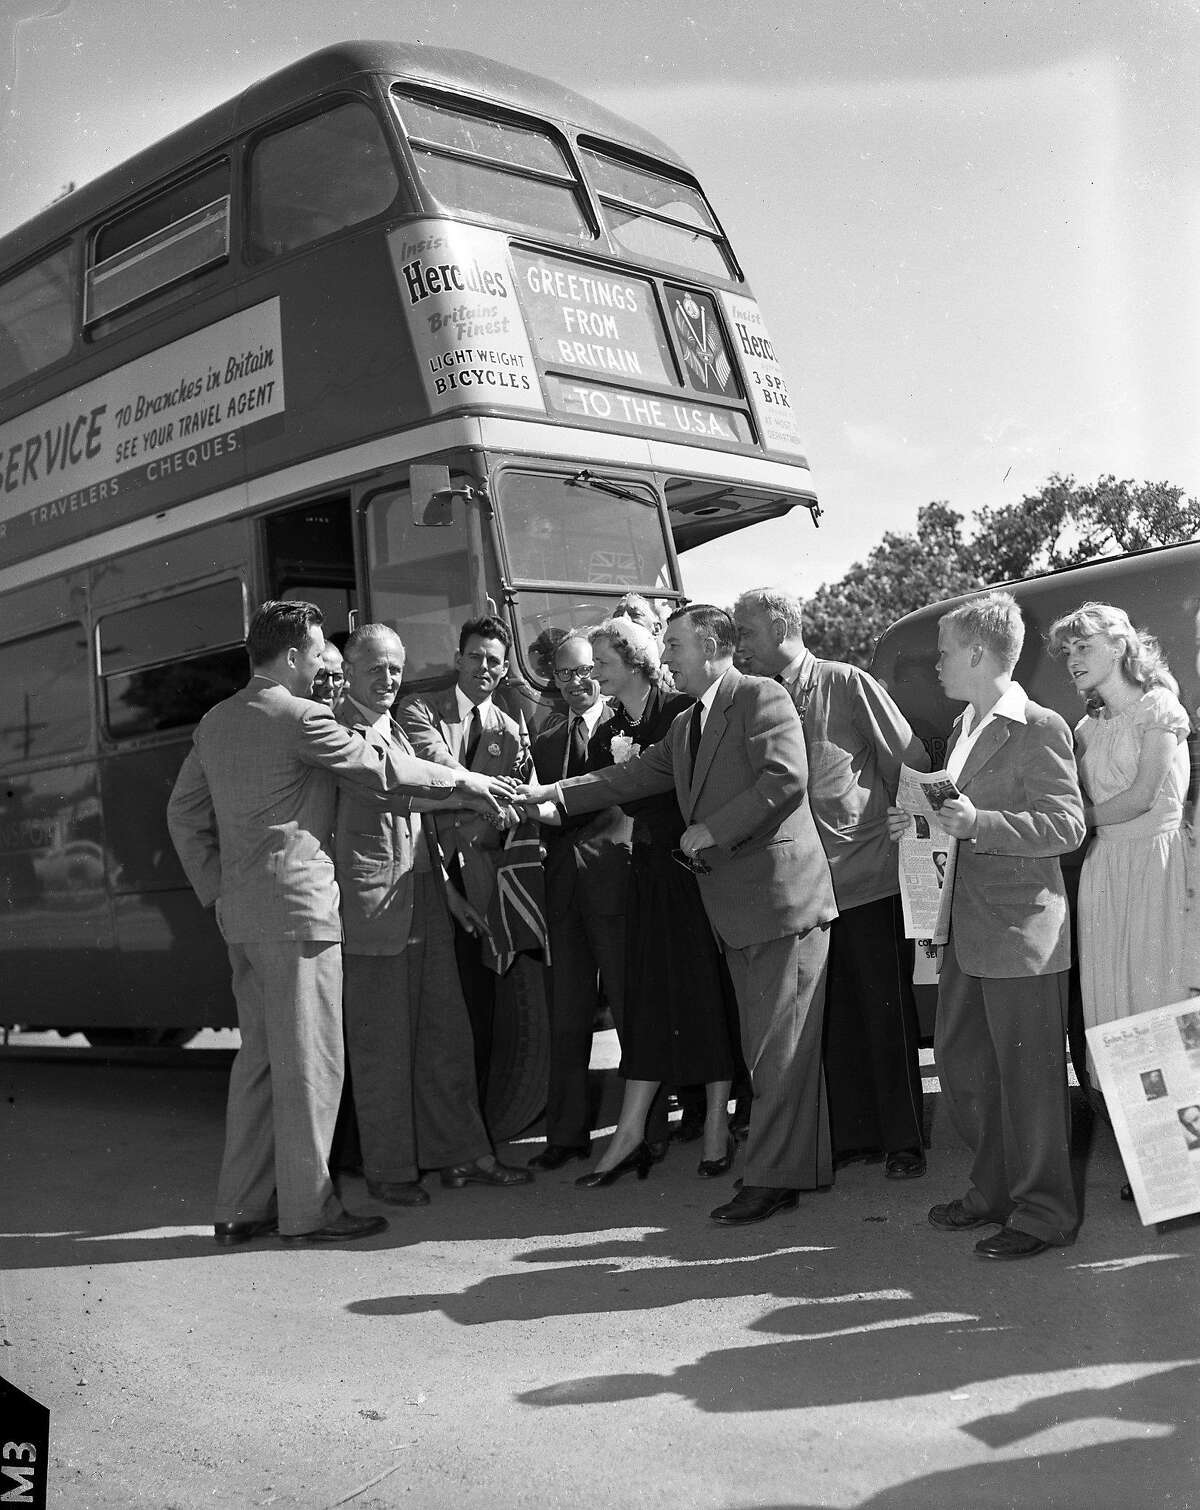 London double-decker buses on a tour of the United States to promote tourism to Great Britain